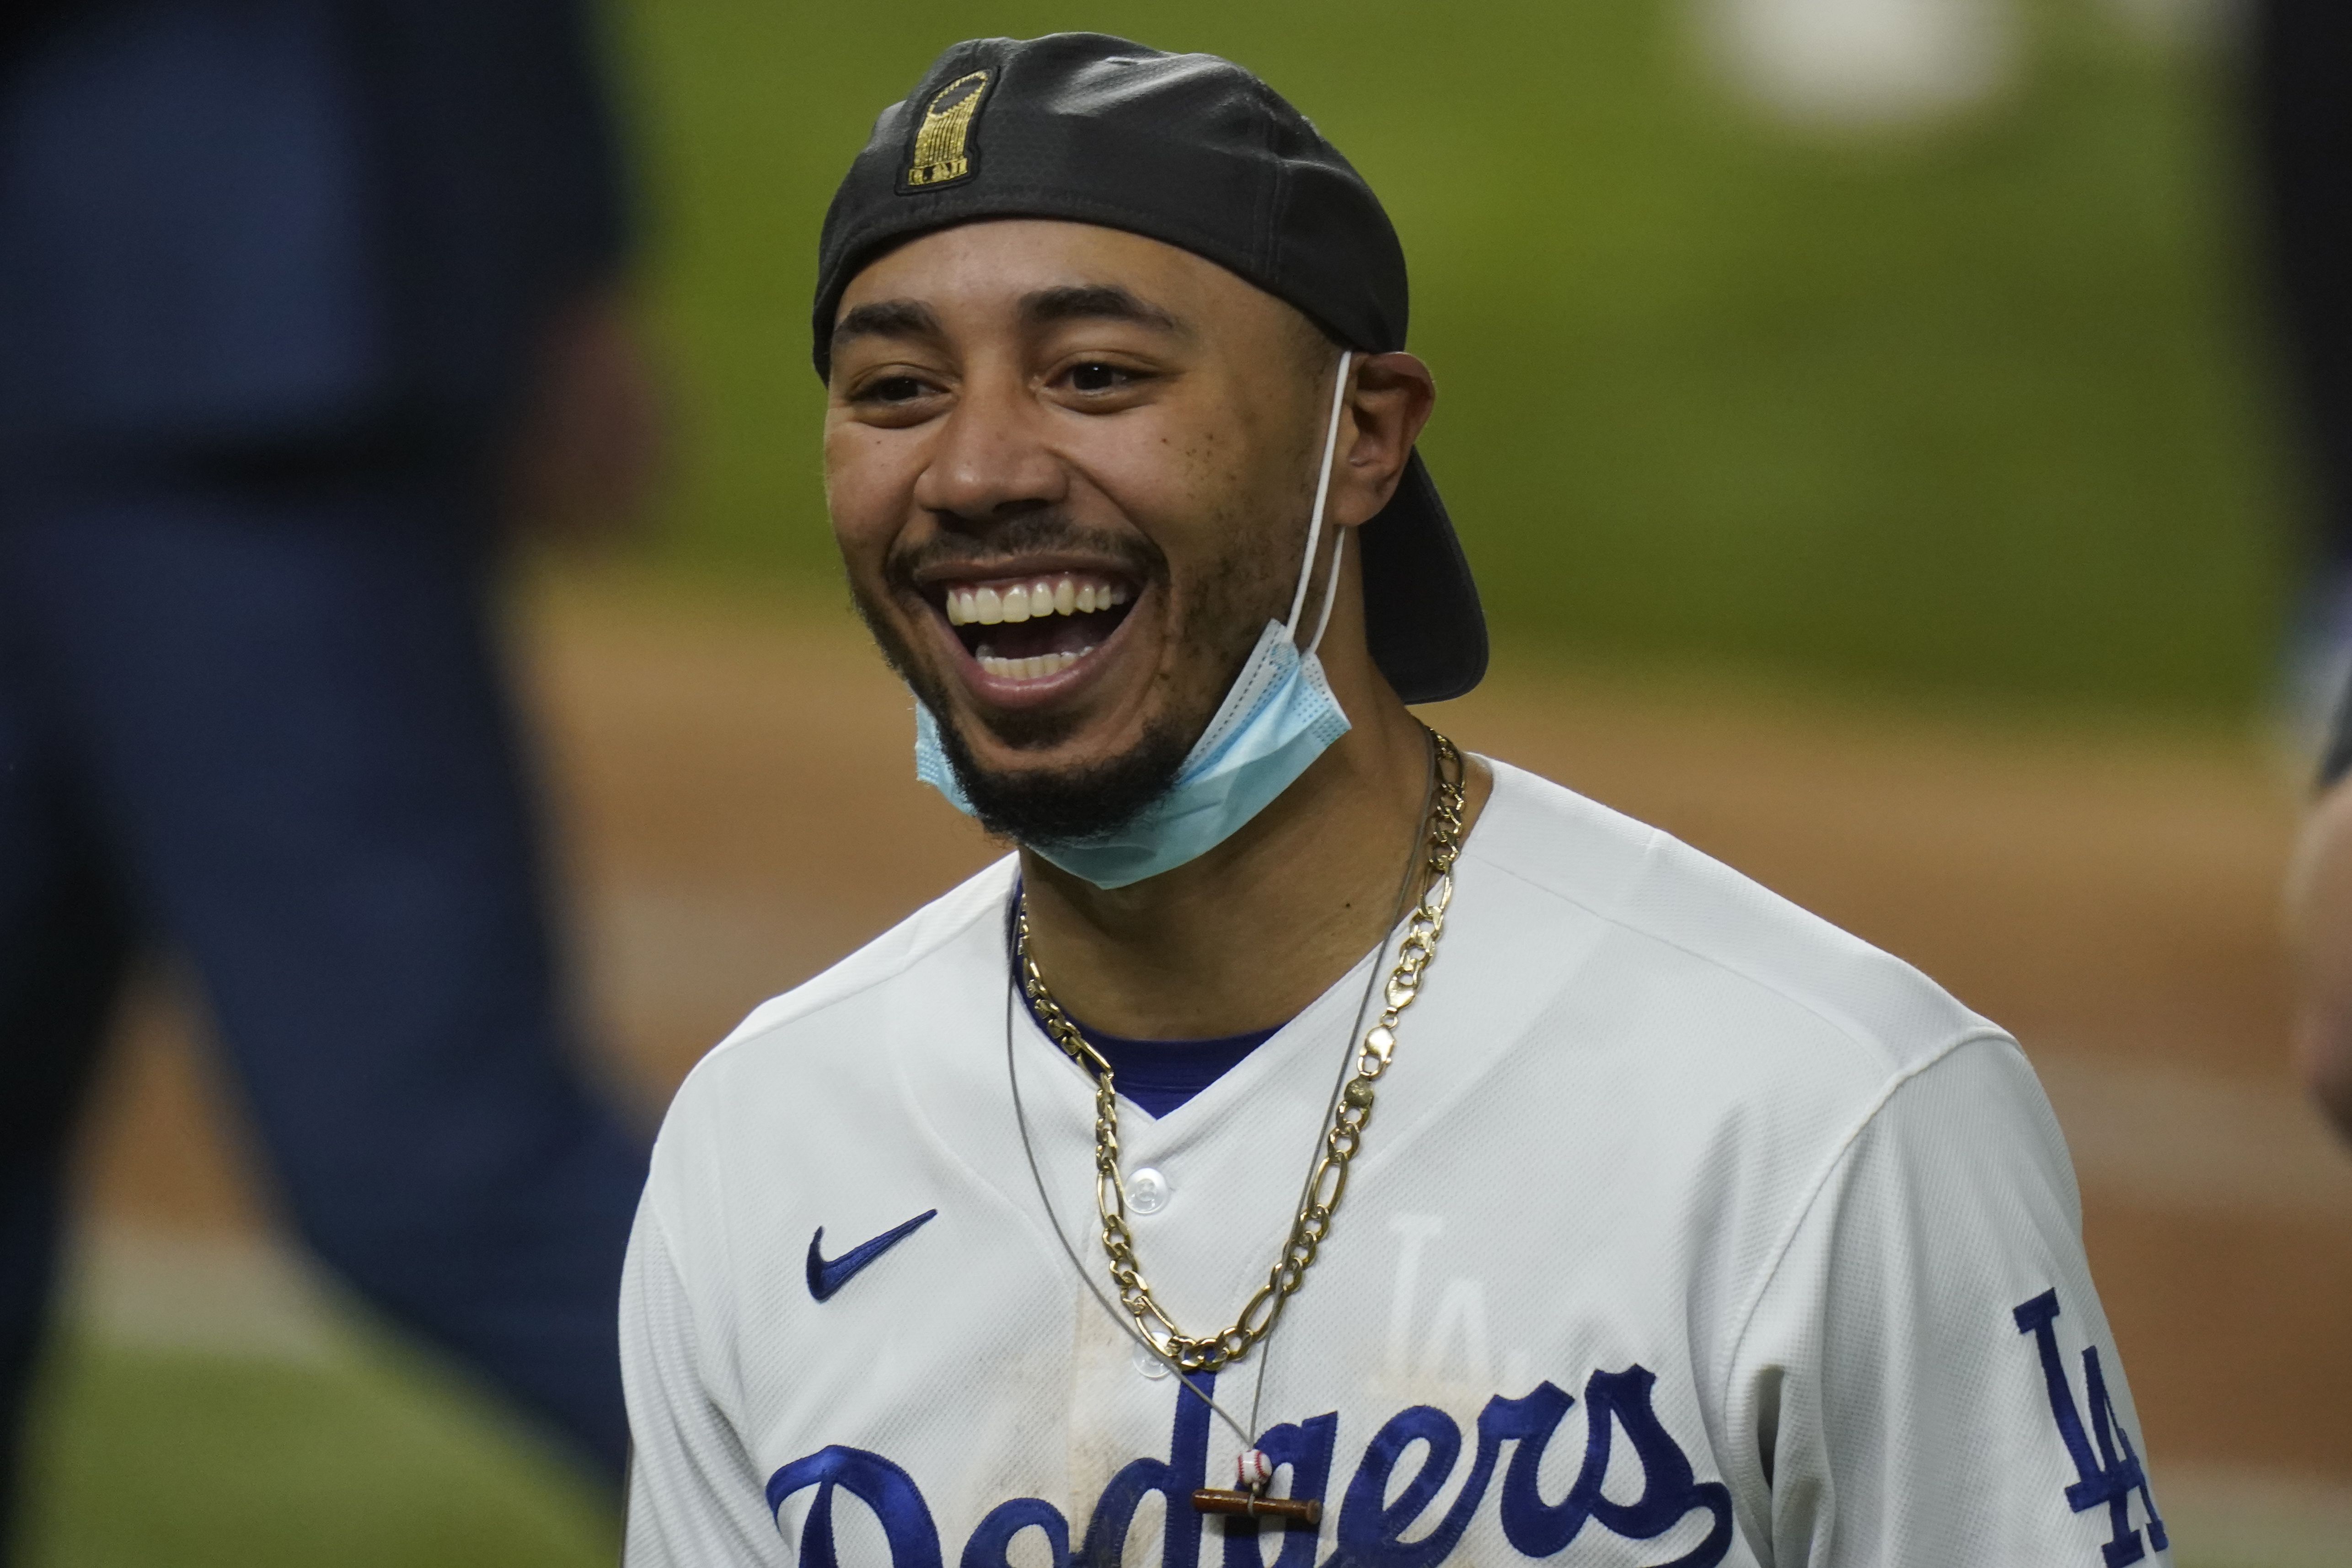 About Mookie Betts and his missing smile